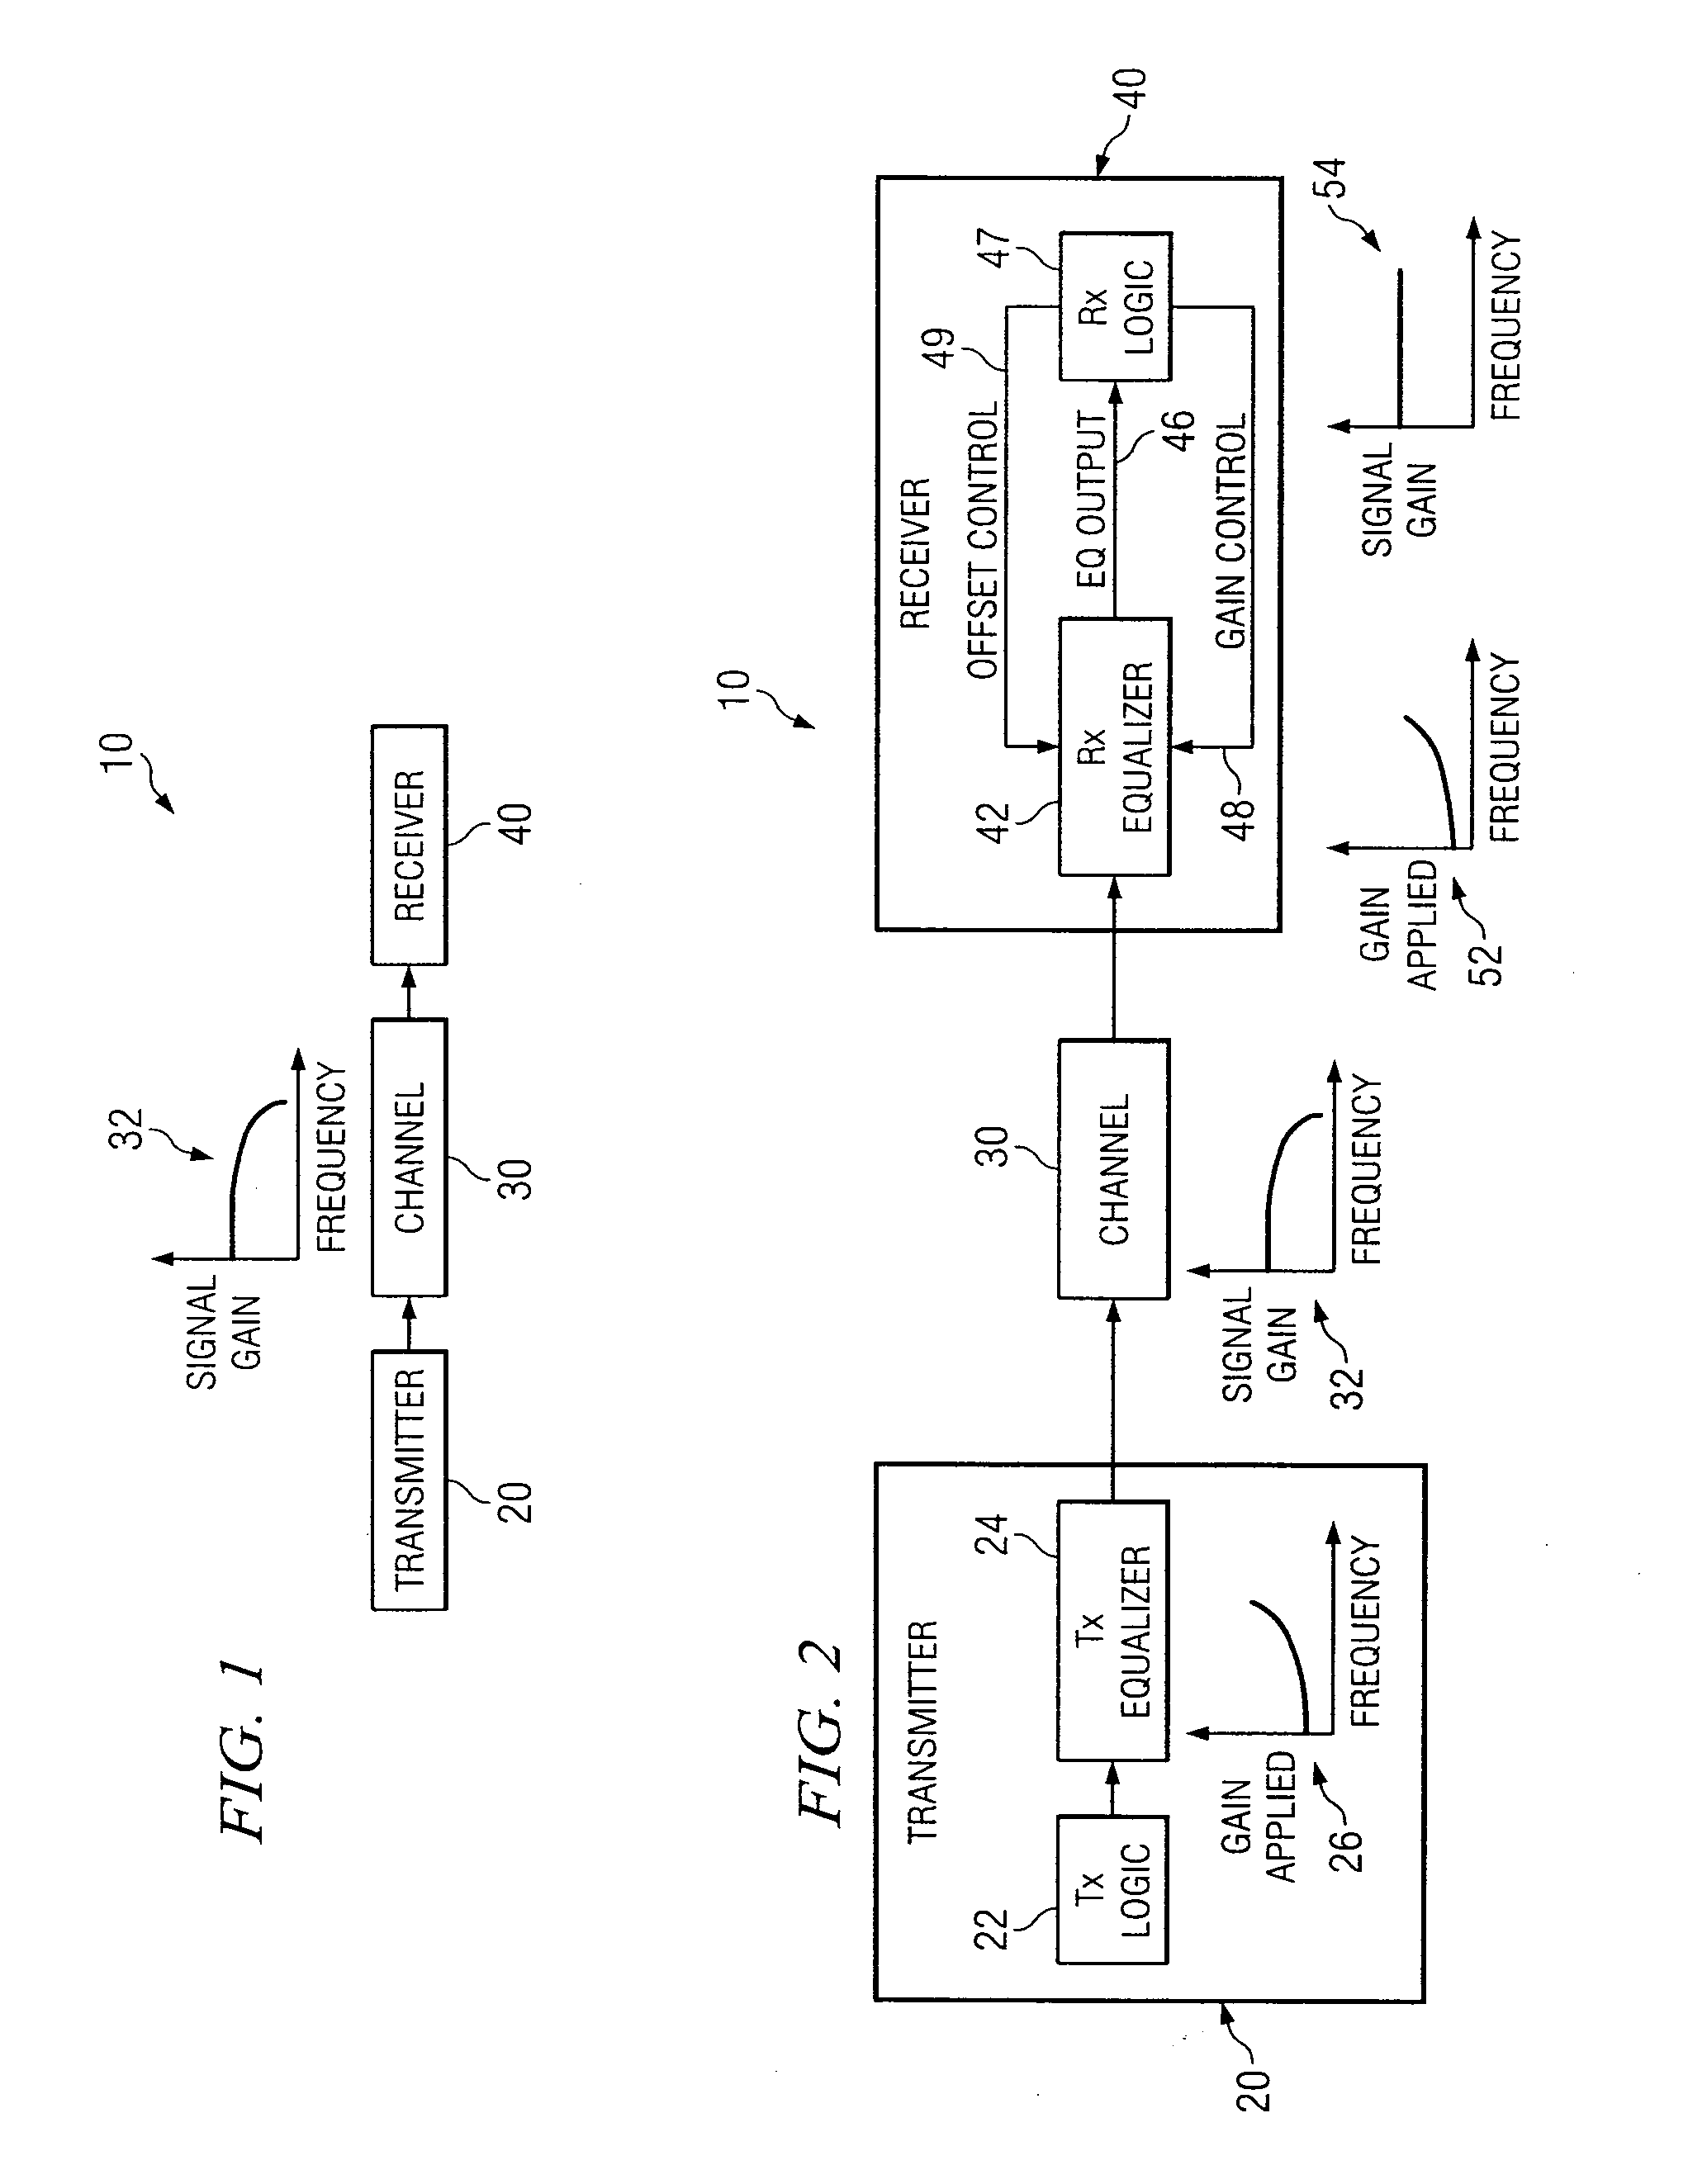 System and Method for Decoupling Multiple Control Loops